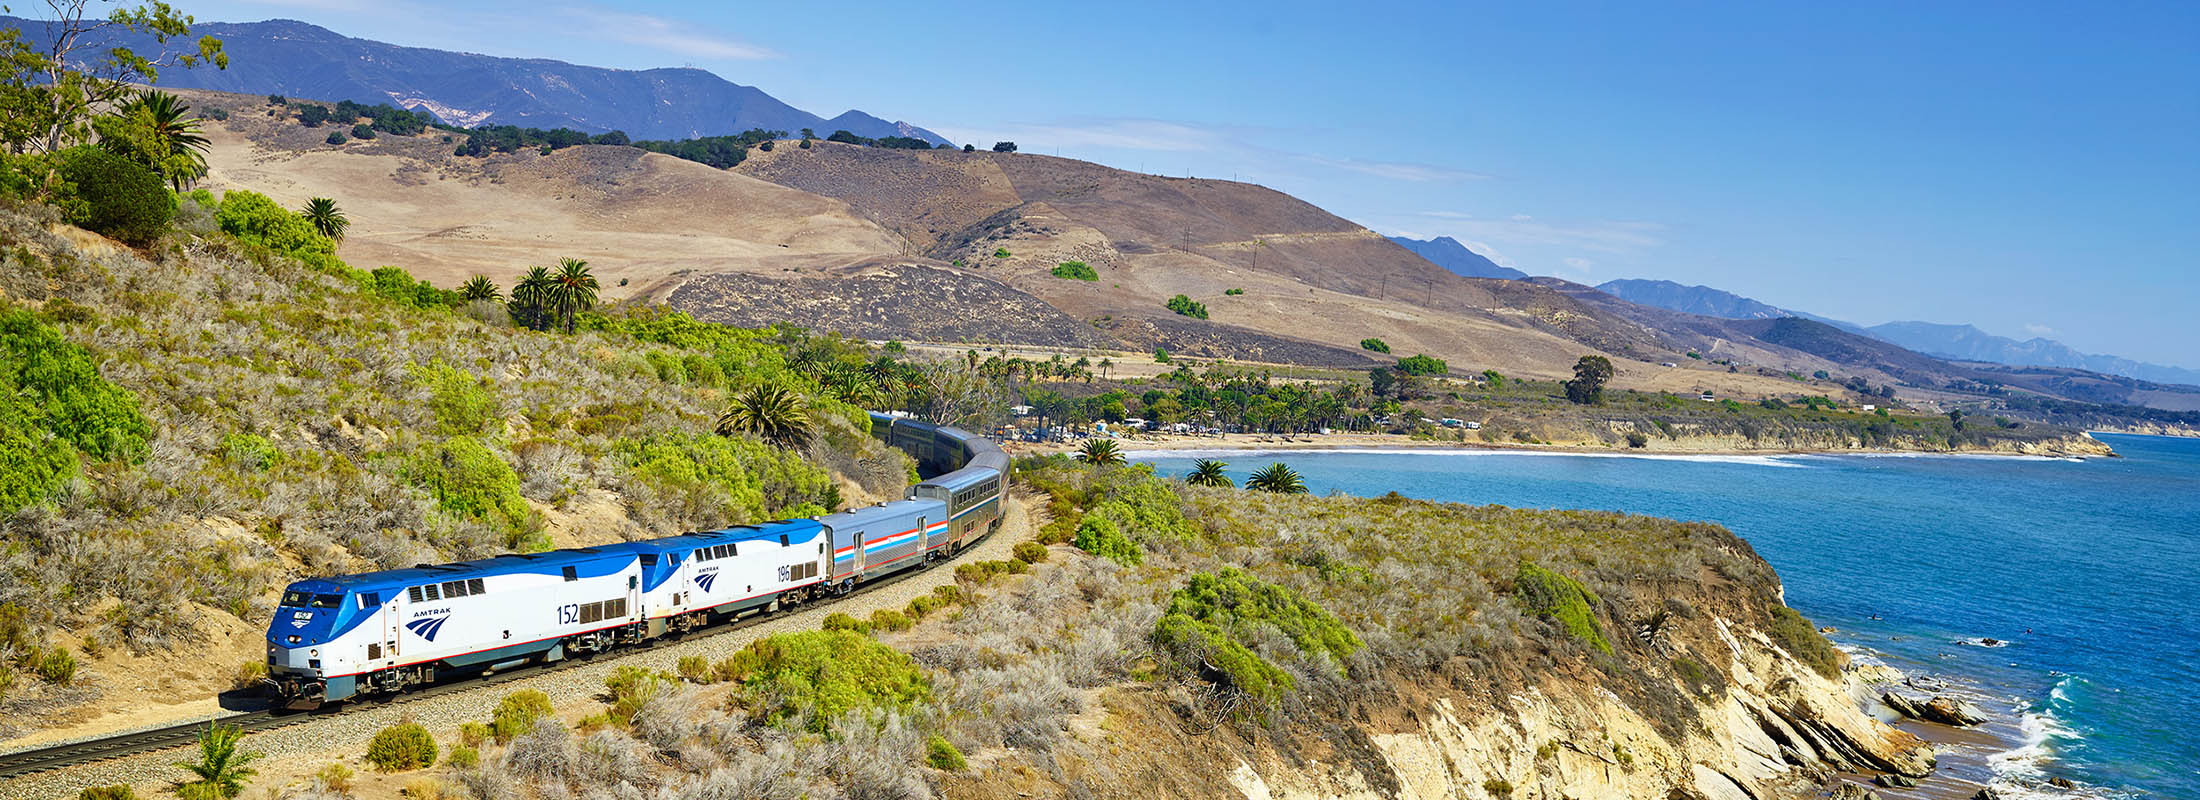 Cross Country Journeys | Amtrak Vacations®